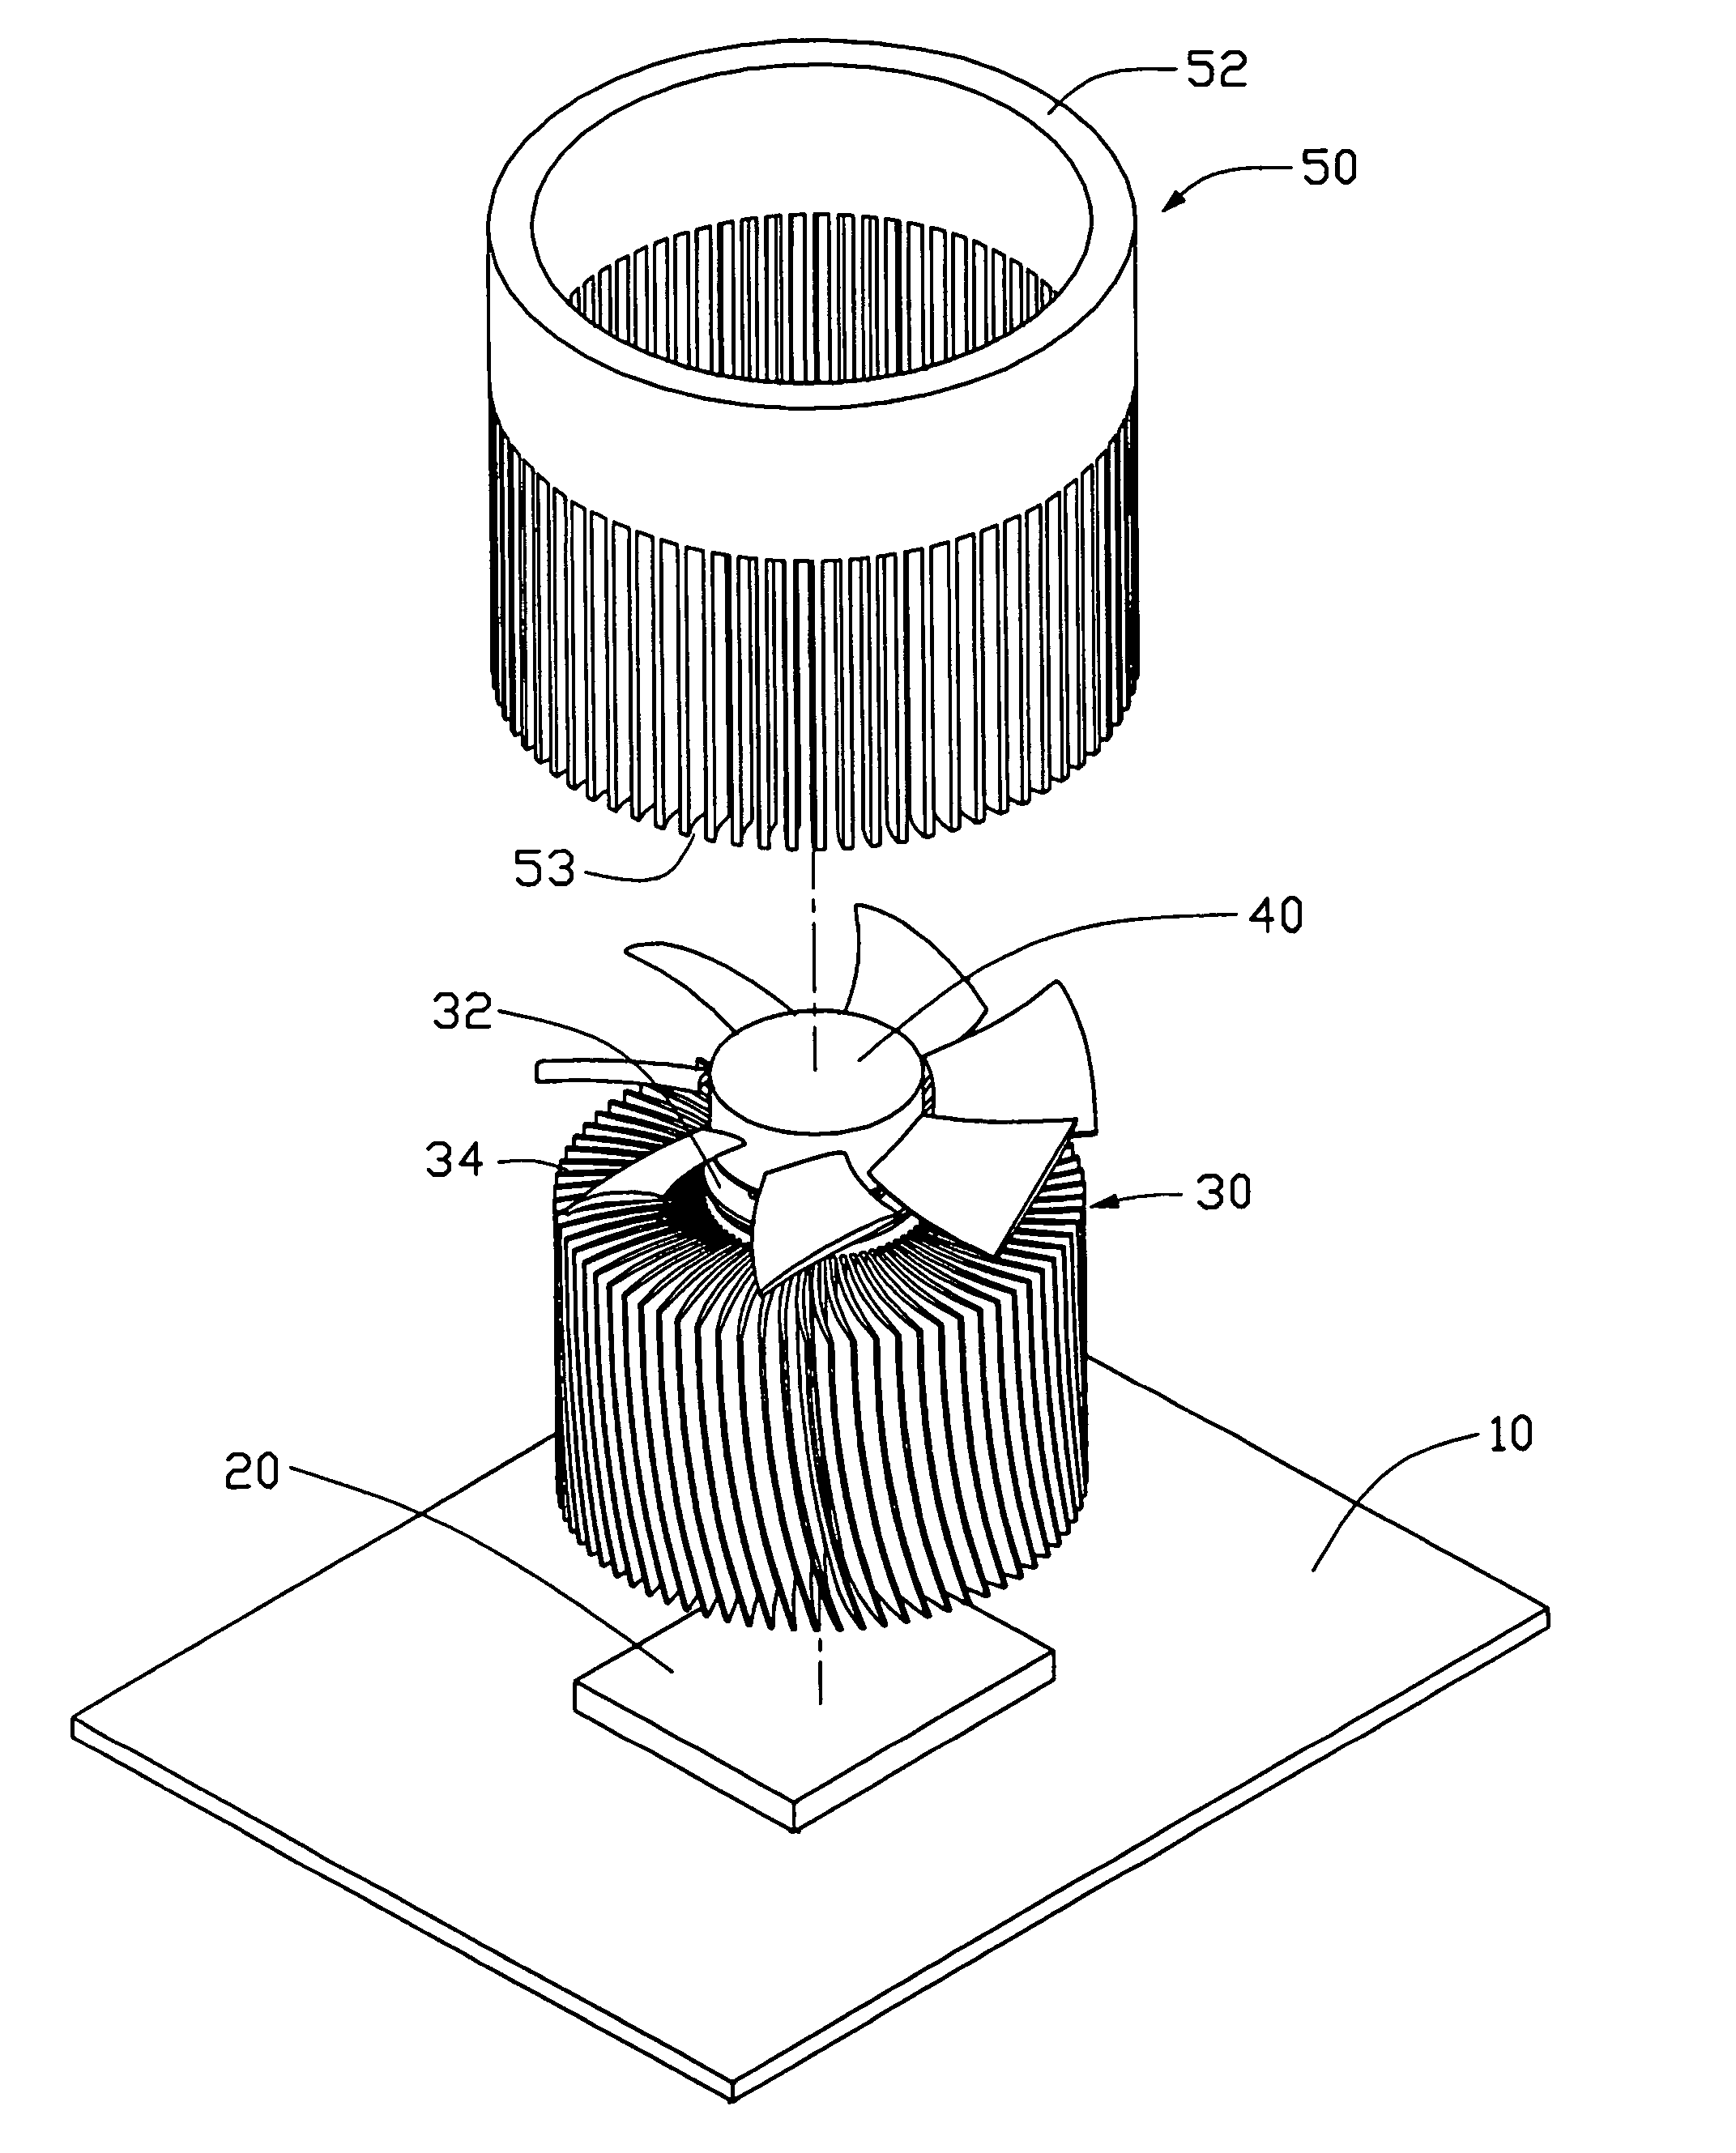 Heat dissipation device assembly with fan cover